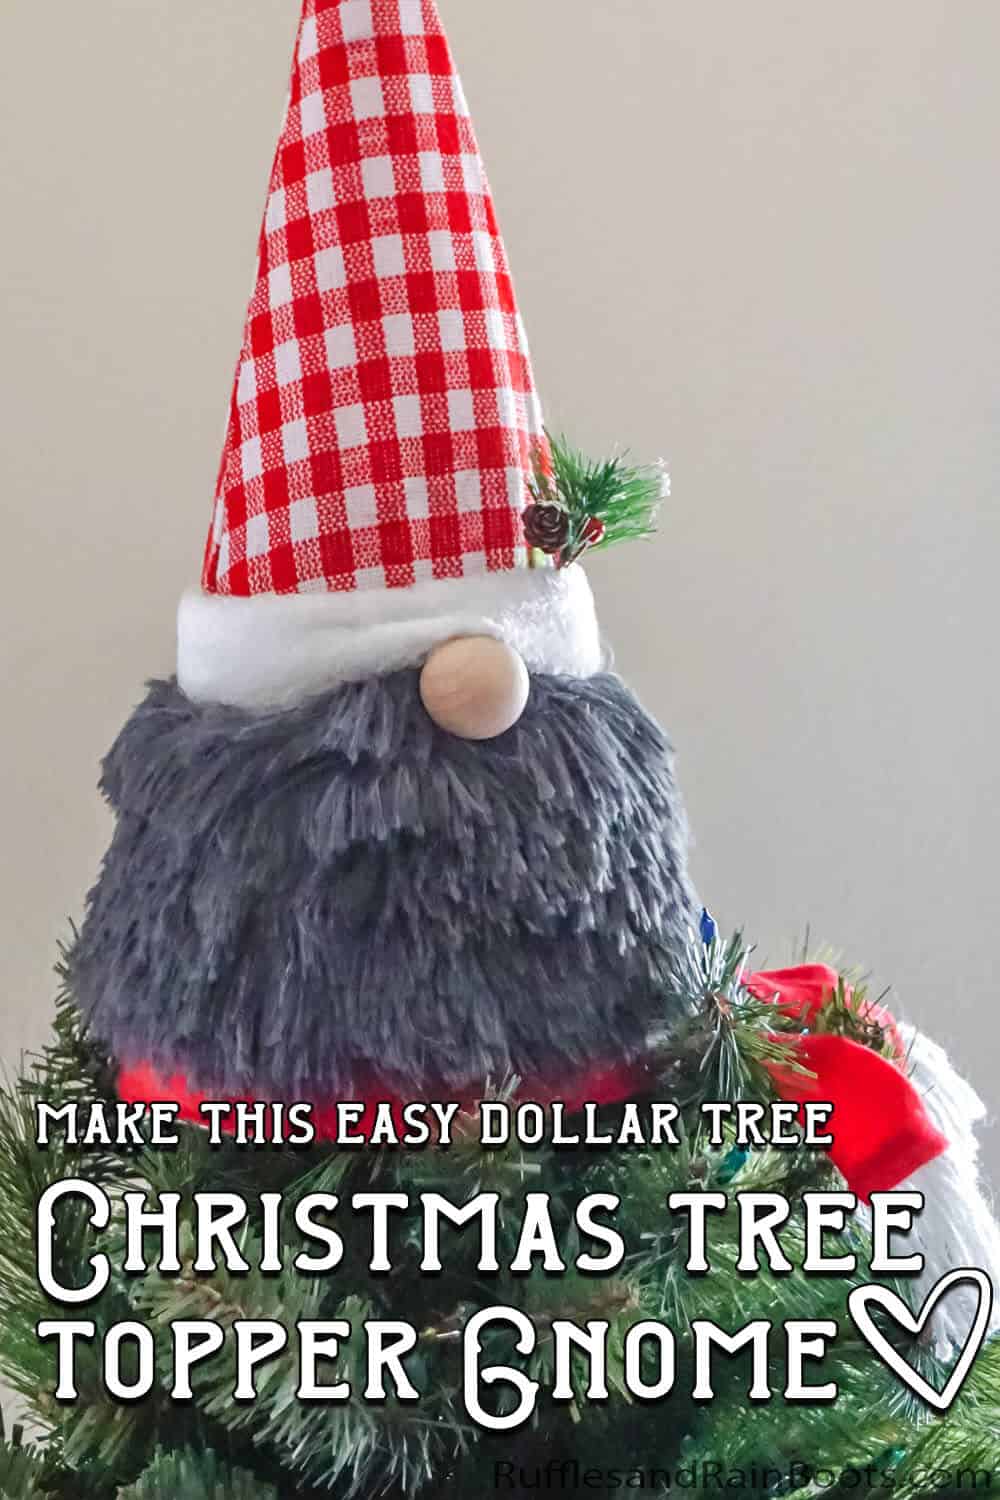 dollar tree christmas tree topper gnome craft with text which reads make this easy dollar tree christmas tree topper gnome